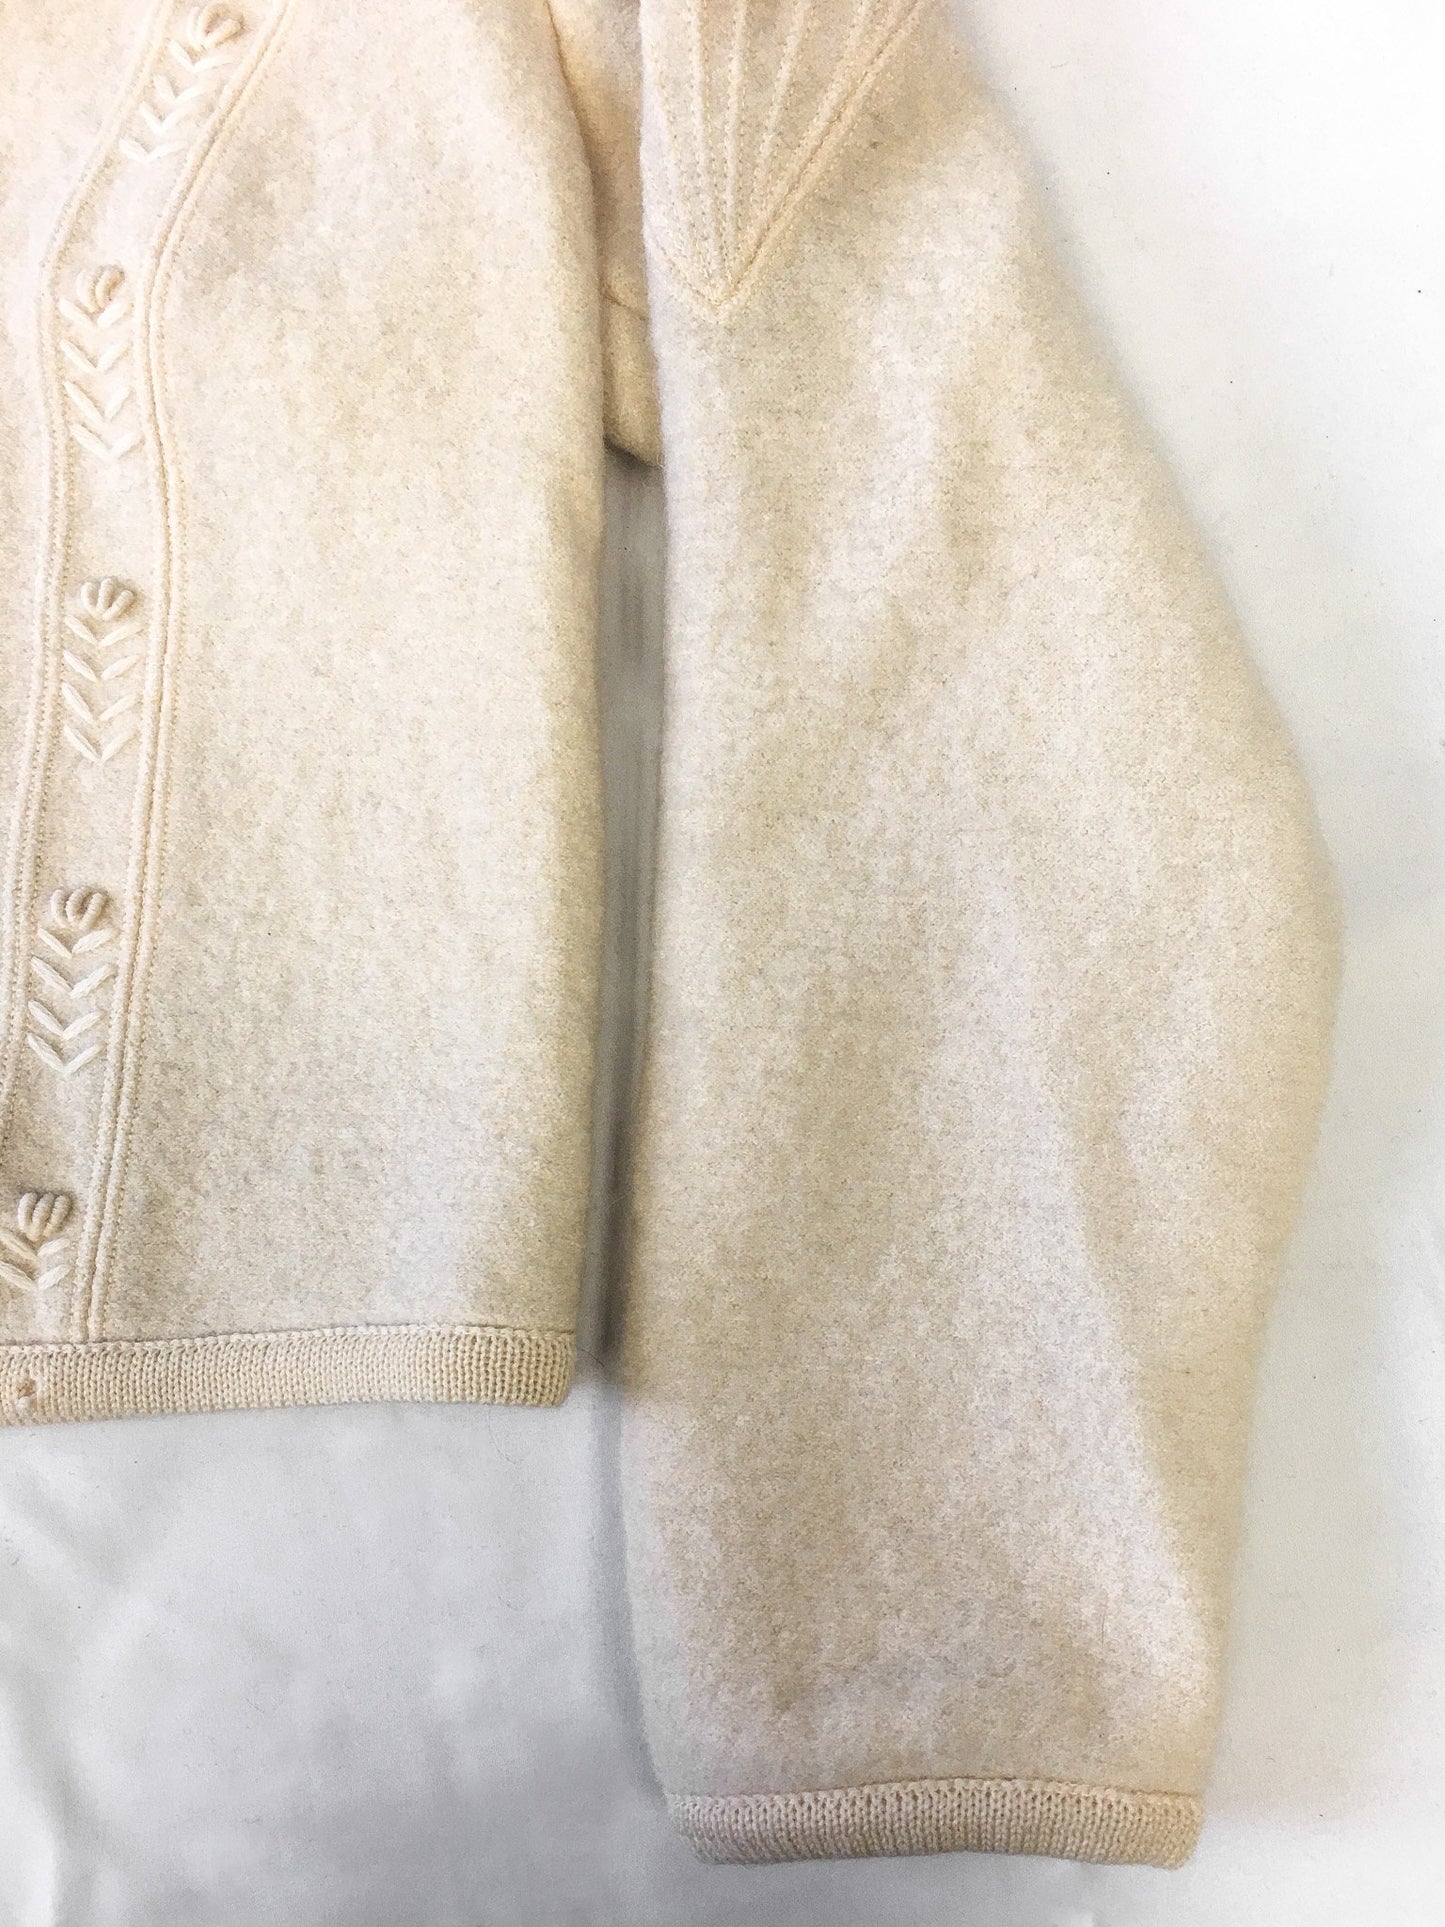 Vintage Geiger Cream Pure Wool Button Up Cardigan with Floral Detail, Sz. 38, Made in Austria